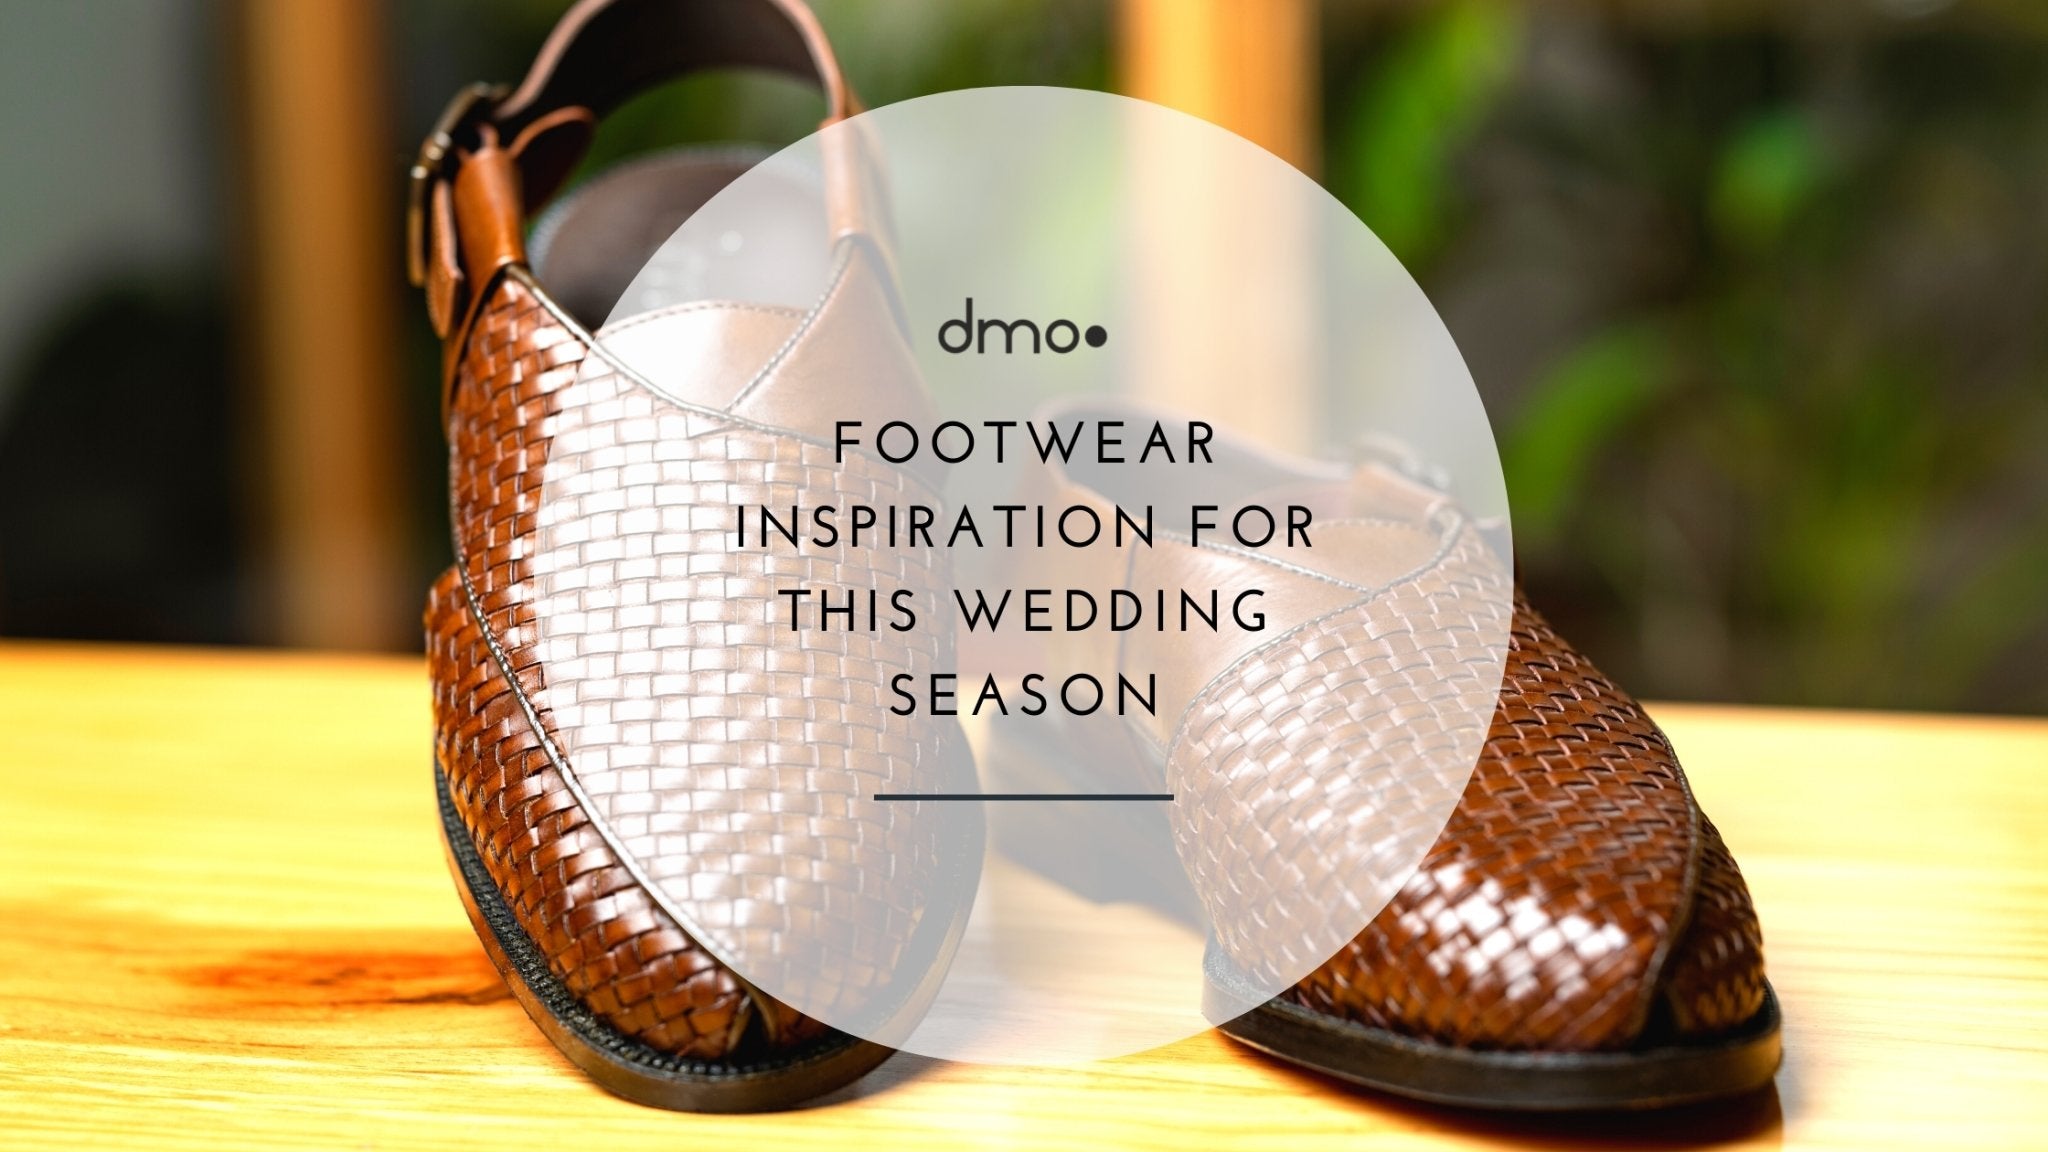 Footwear inspiration for this wedding season - dmodot Shoes